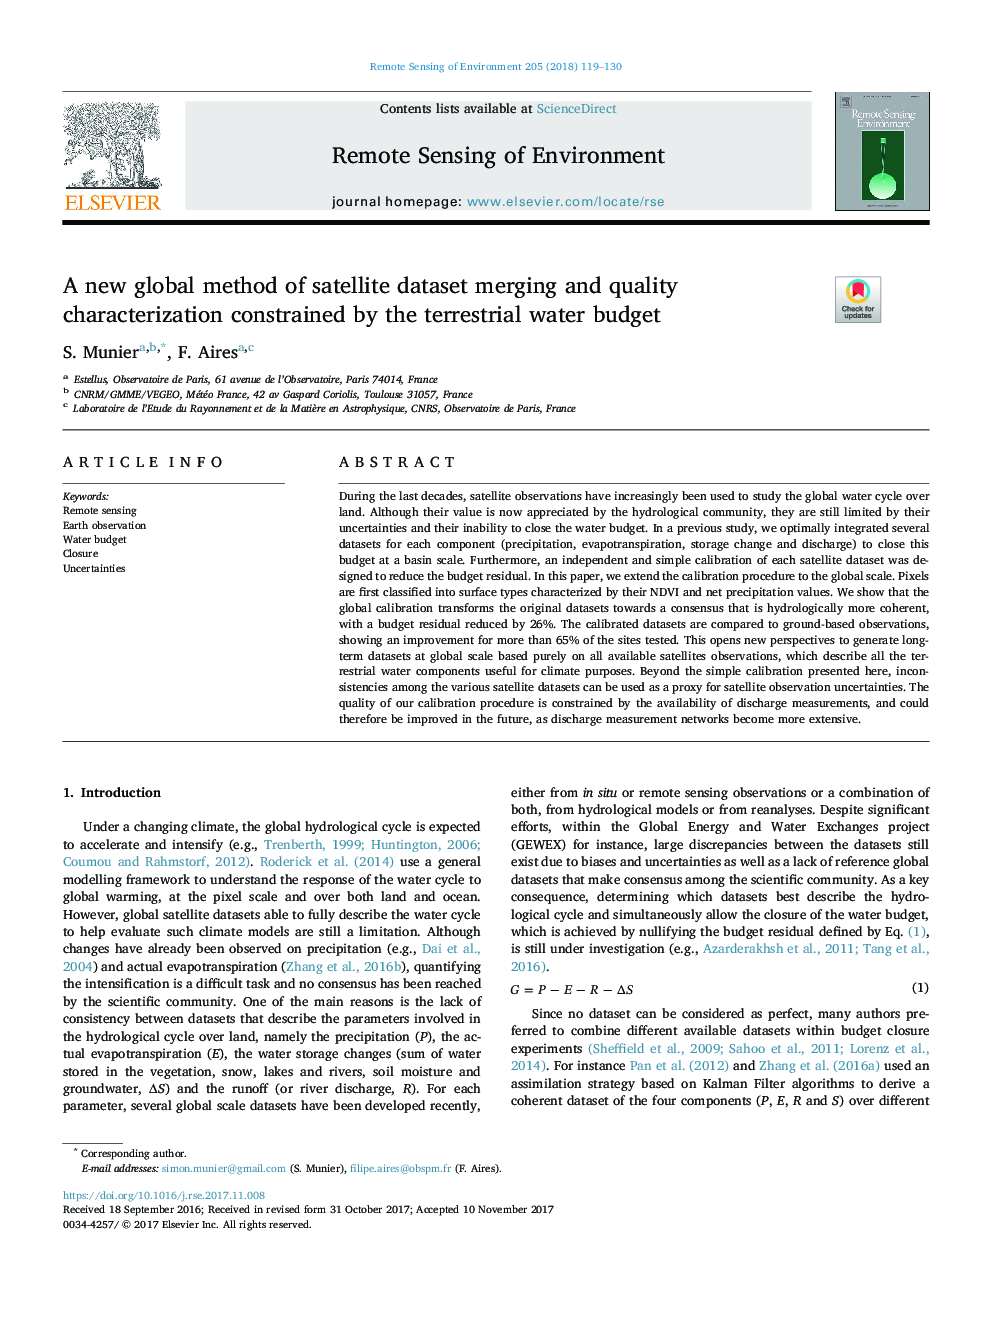 A new global method of satellite dataset merging and quality characterization constrained by the terrestrial water budget